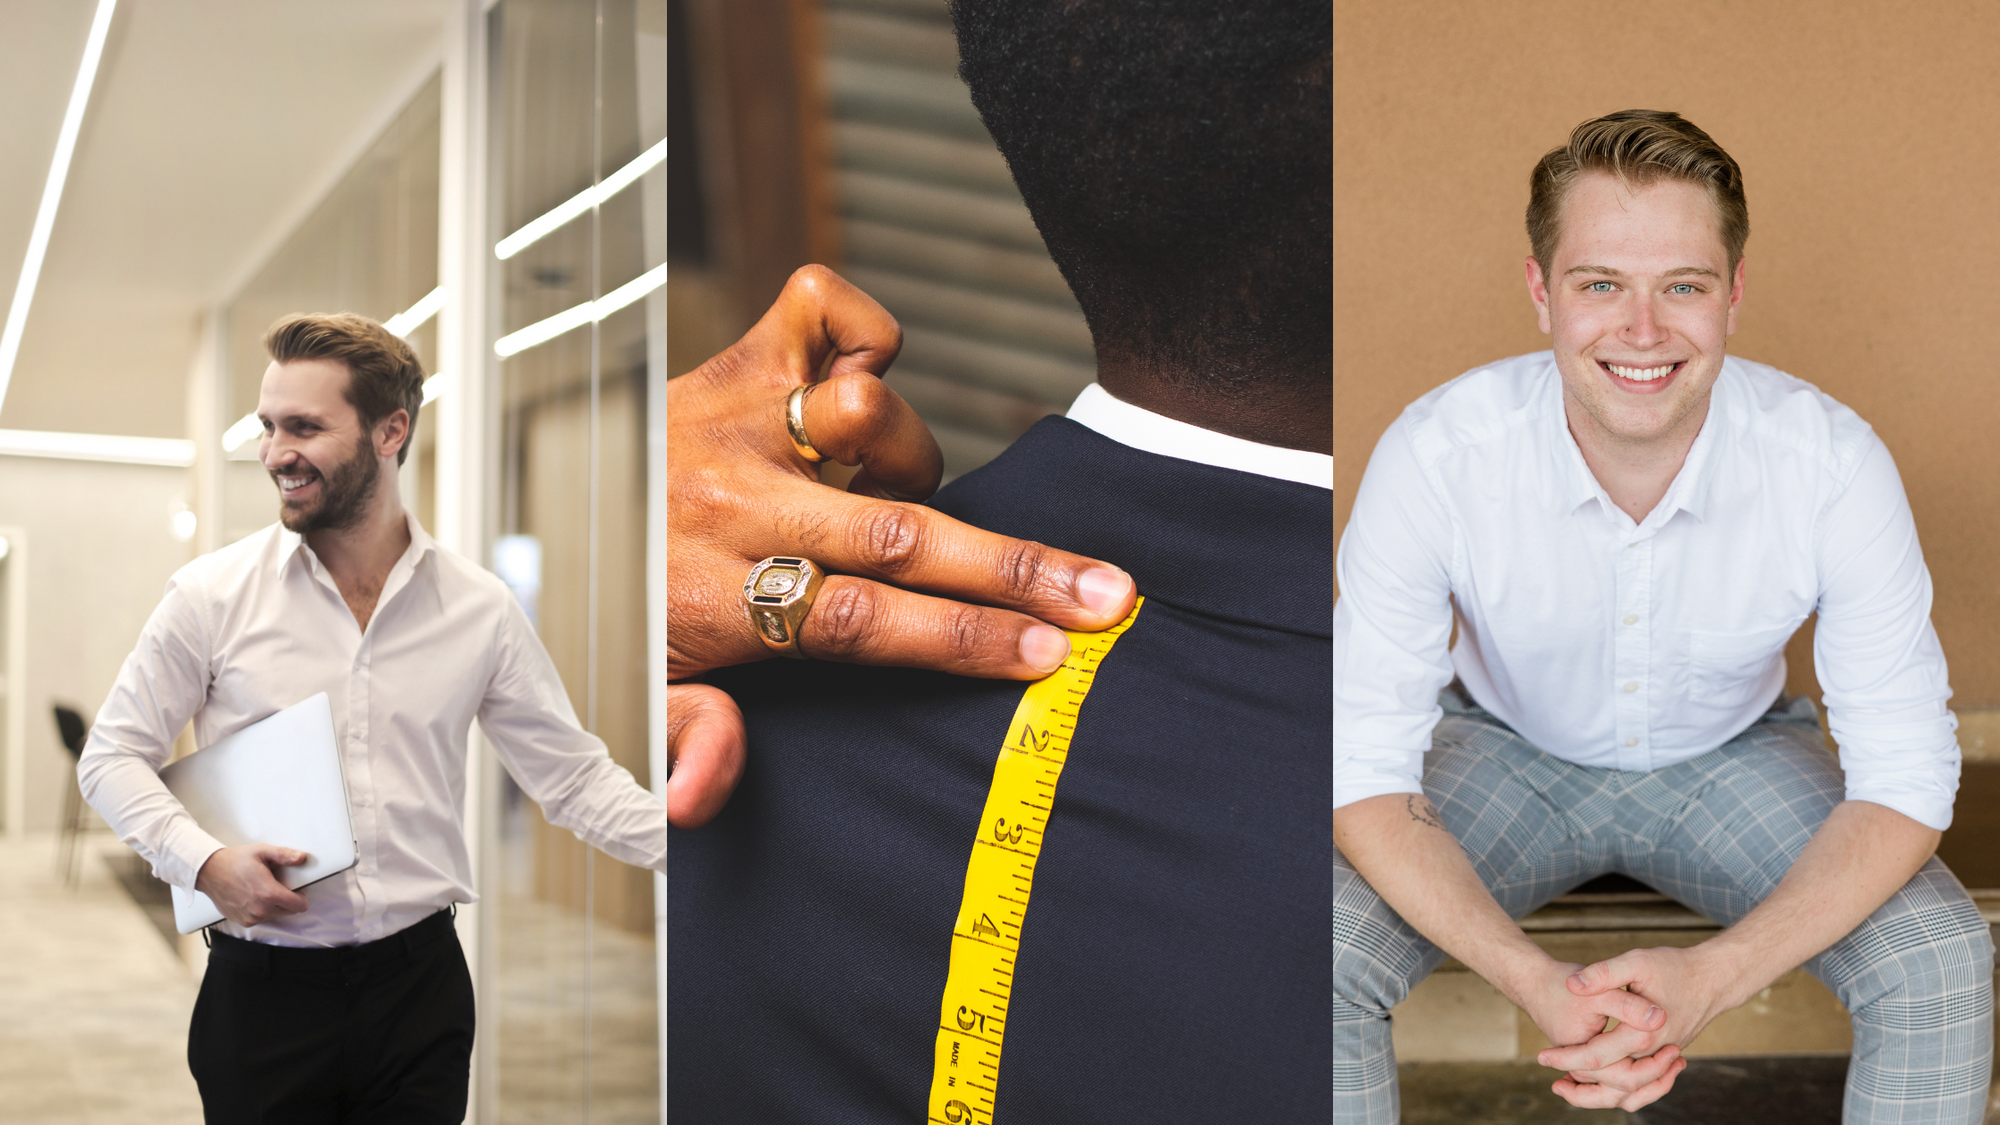 how to measure dress shirt size